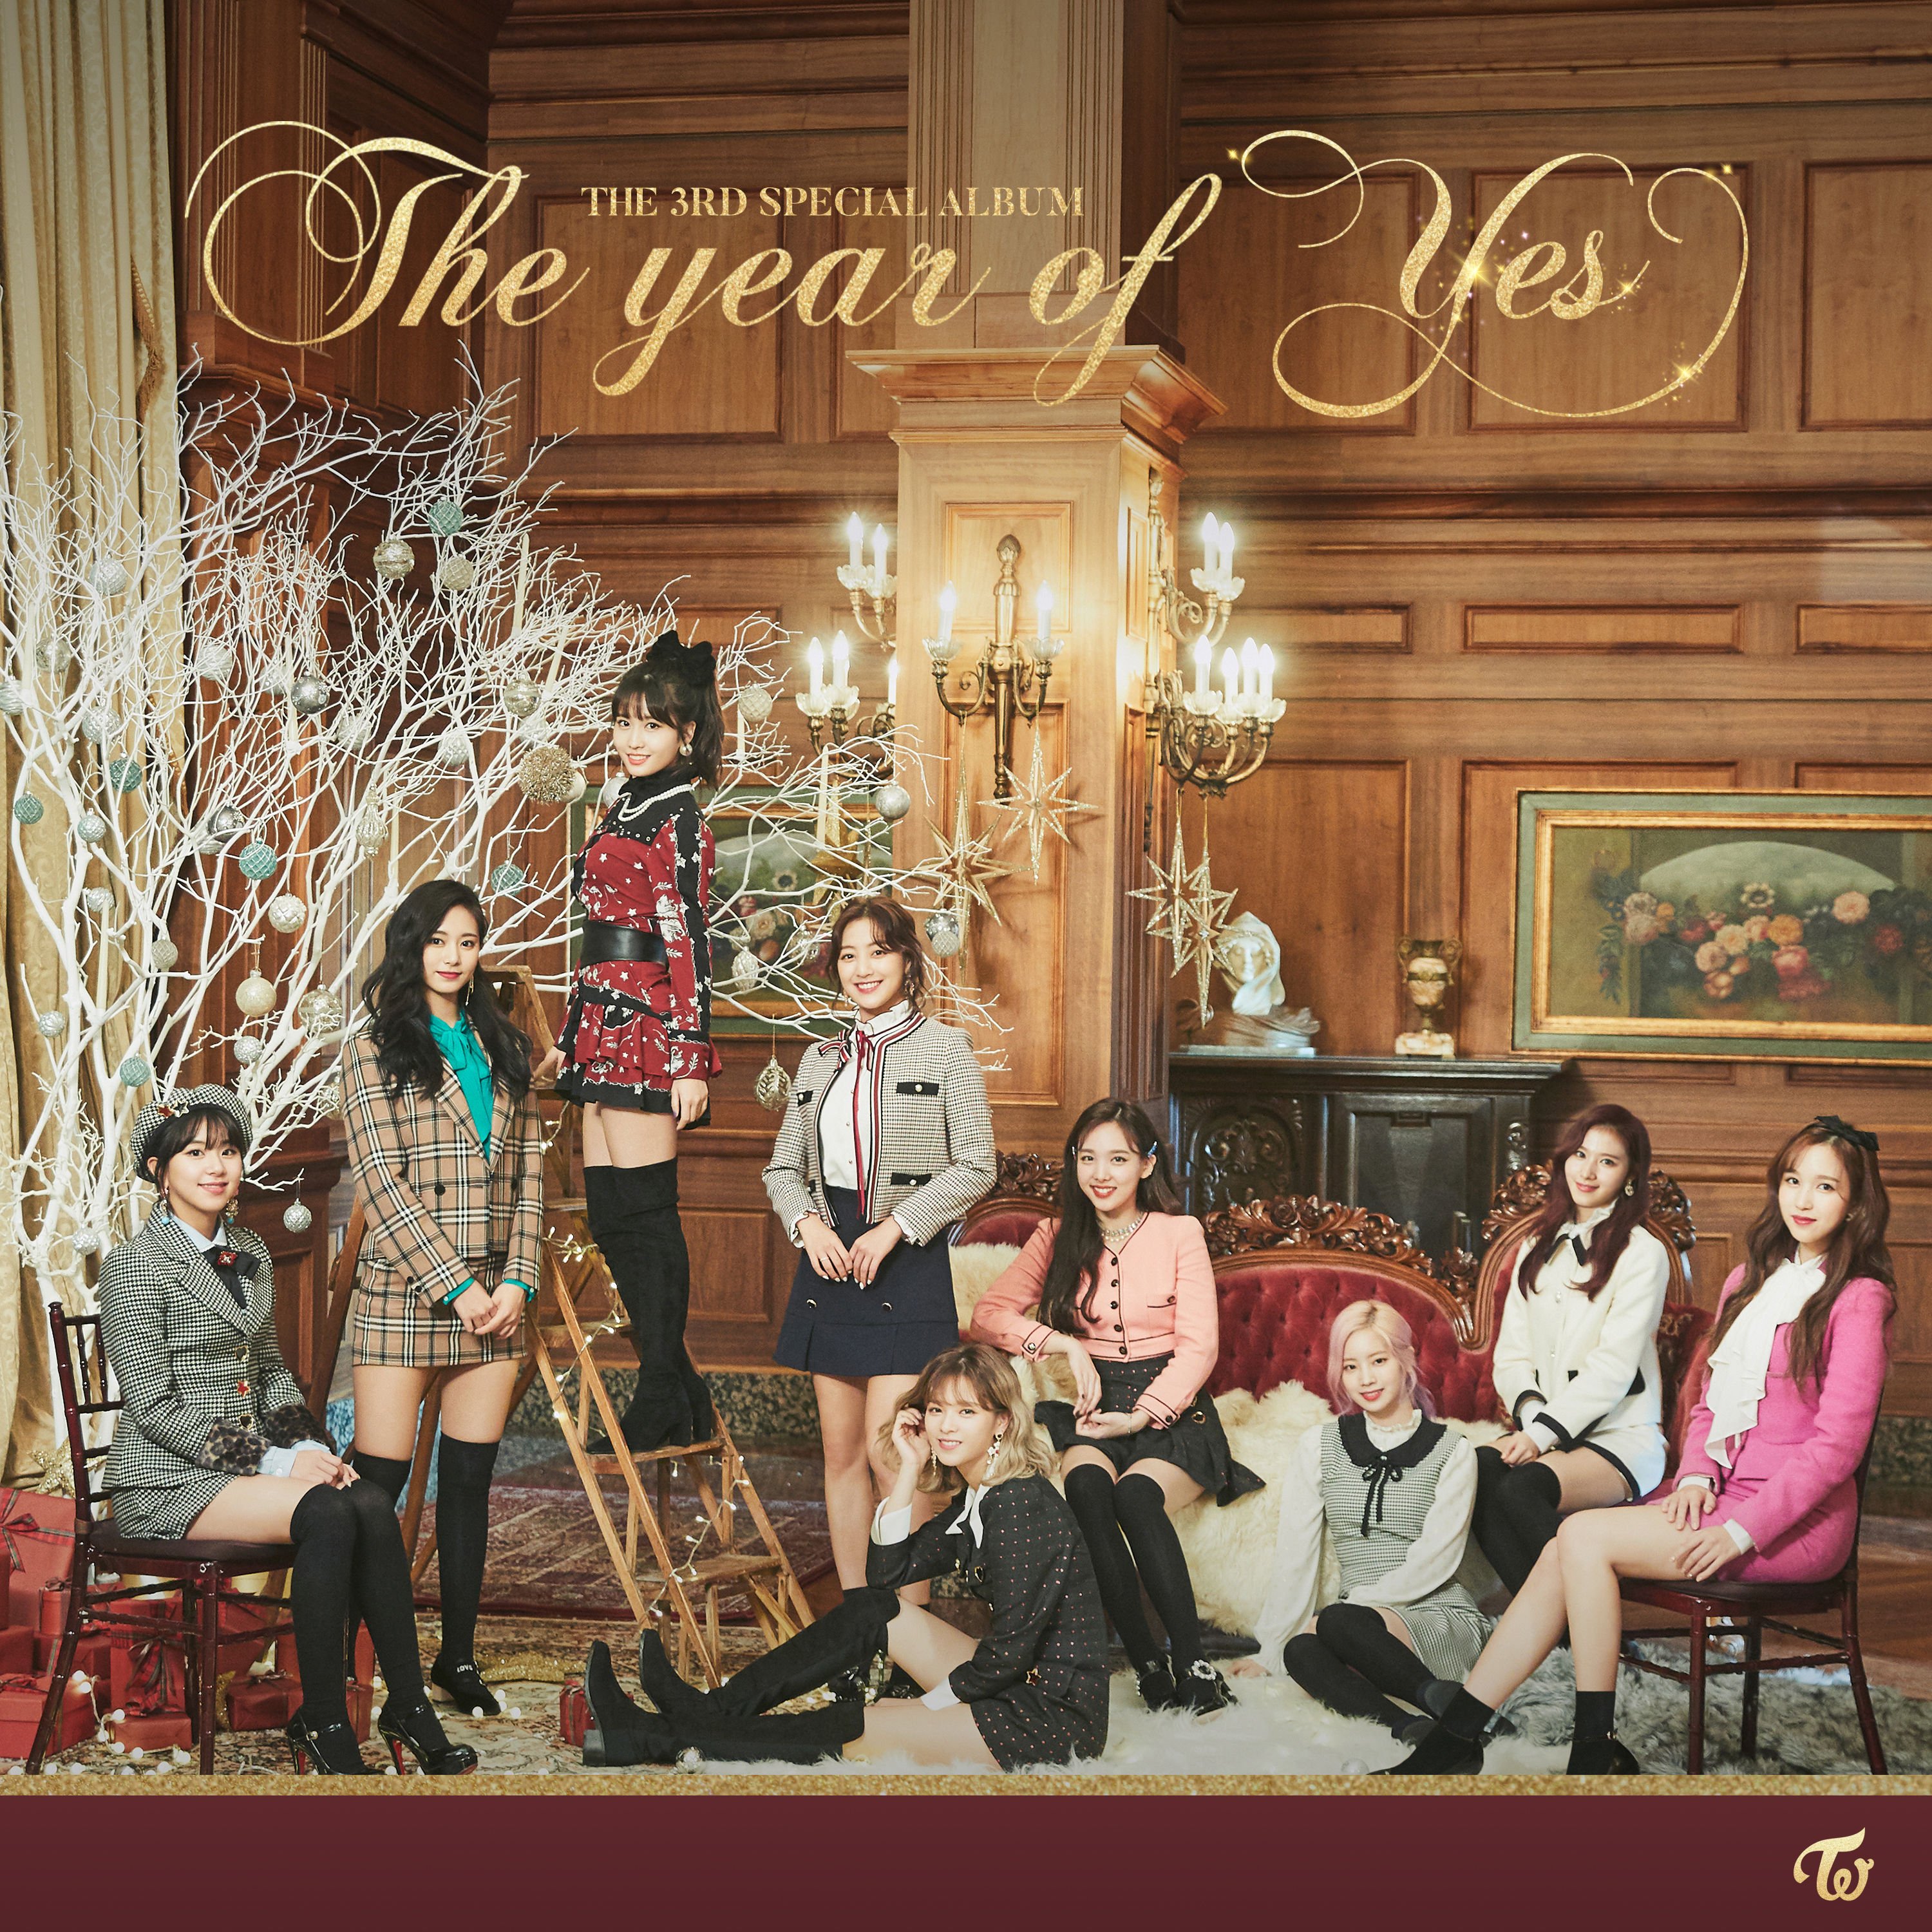 The year of the french. Twice the year of Yes album. Twice the year of Yes album Cover. Twice обложки альбомов. Yes album Covers.